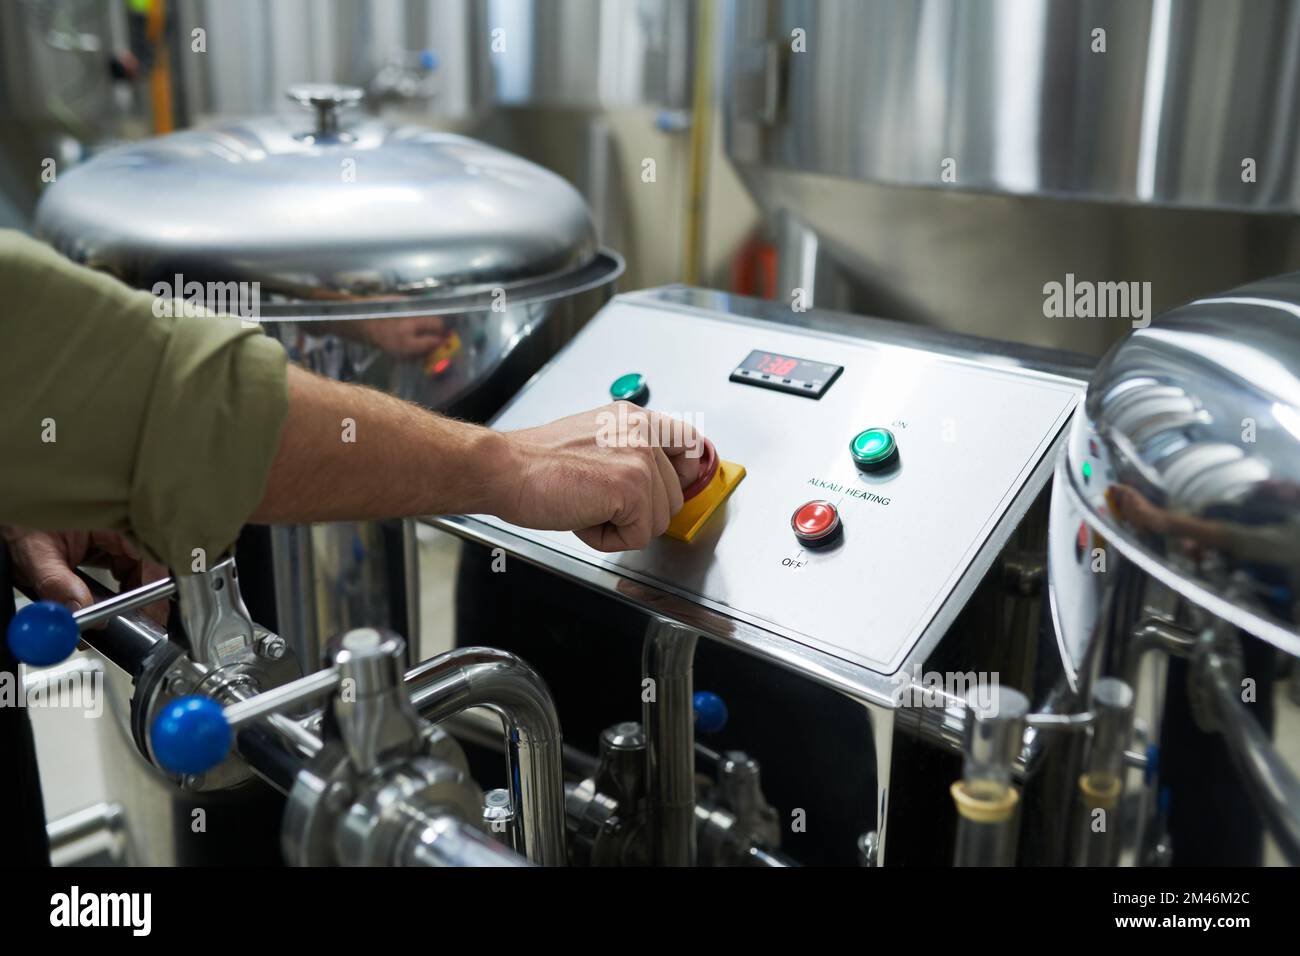 Closeup image of worker launching brewery equipment for beer fermentation and maturation Stock Photo